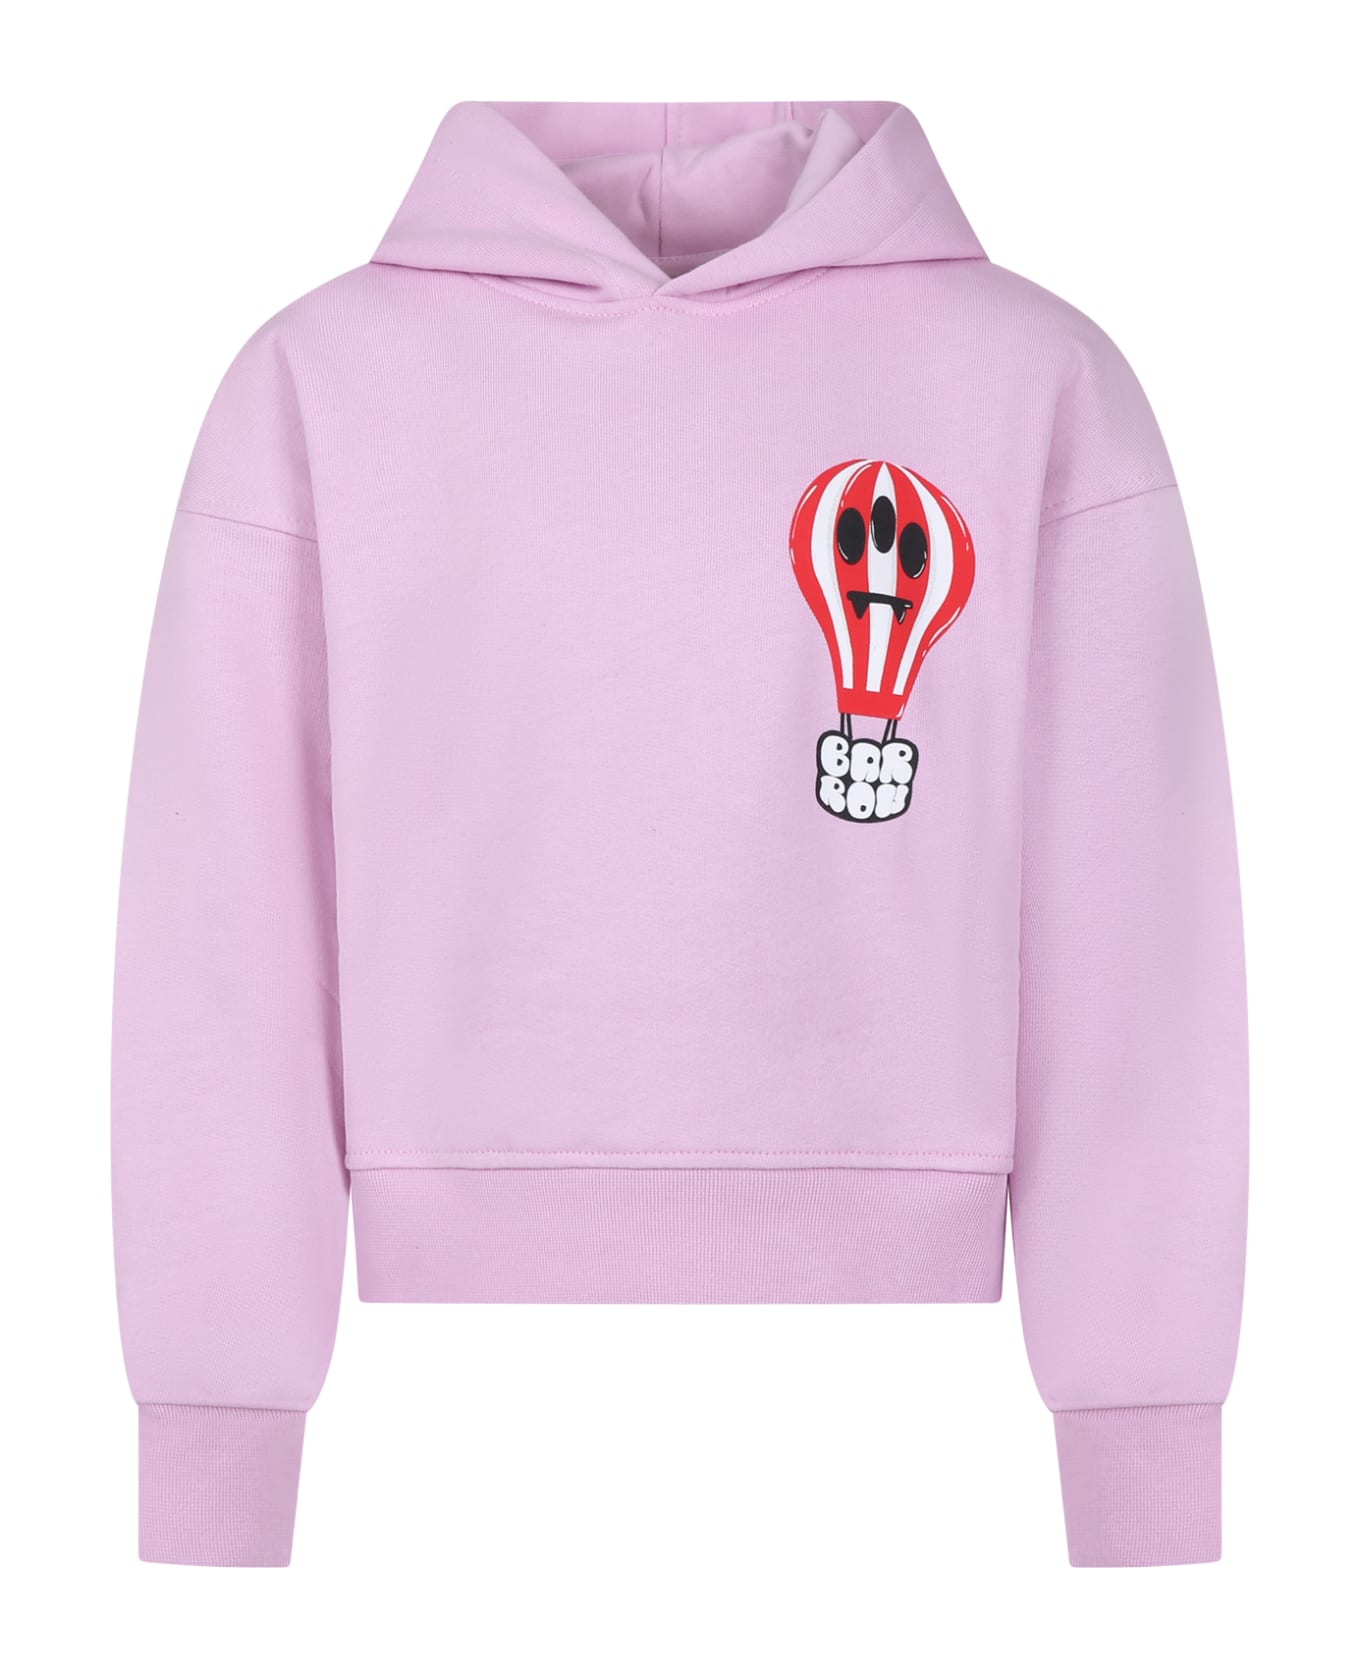 Barrow Pink Sweatshirt For Girls With Logo And Hot Air Balloon - Rosa